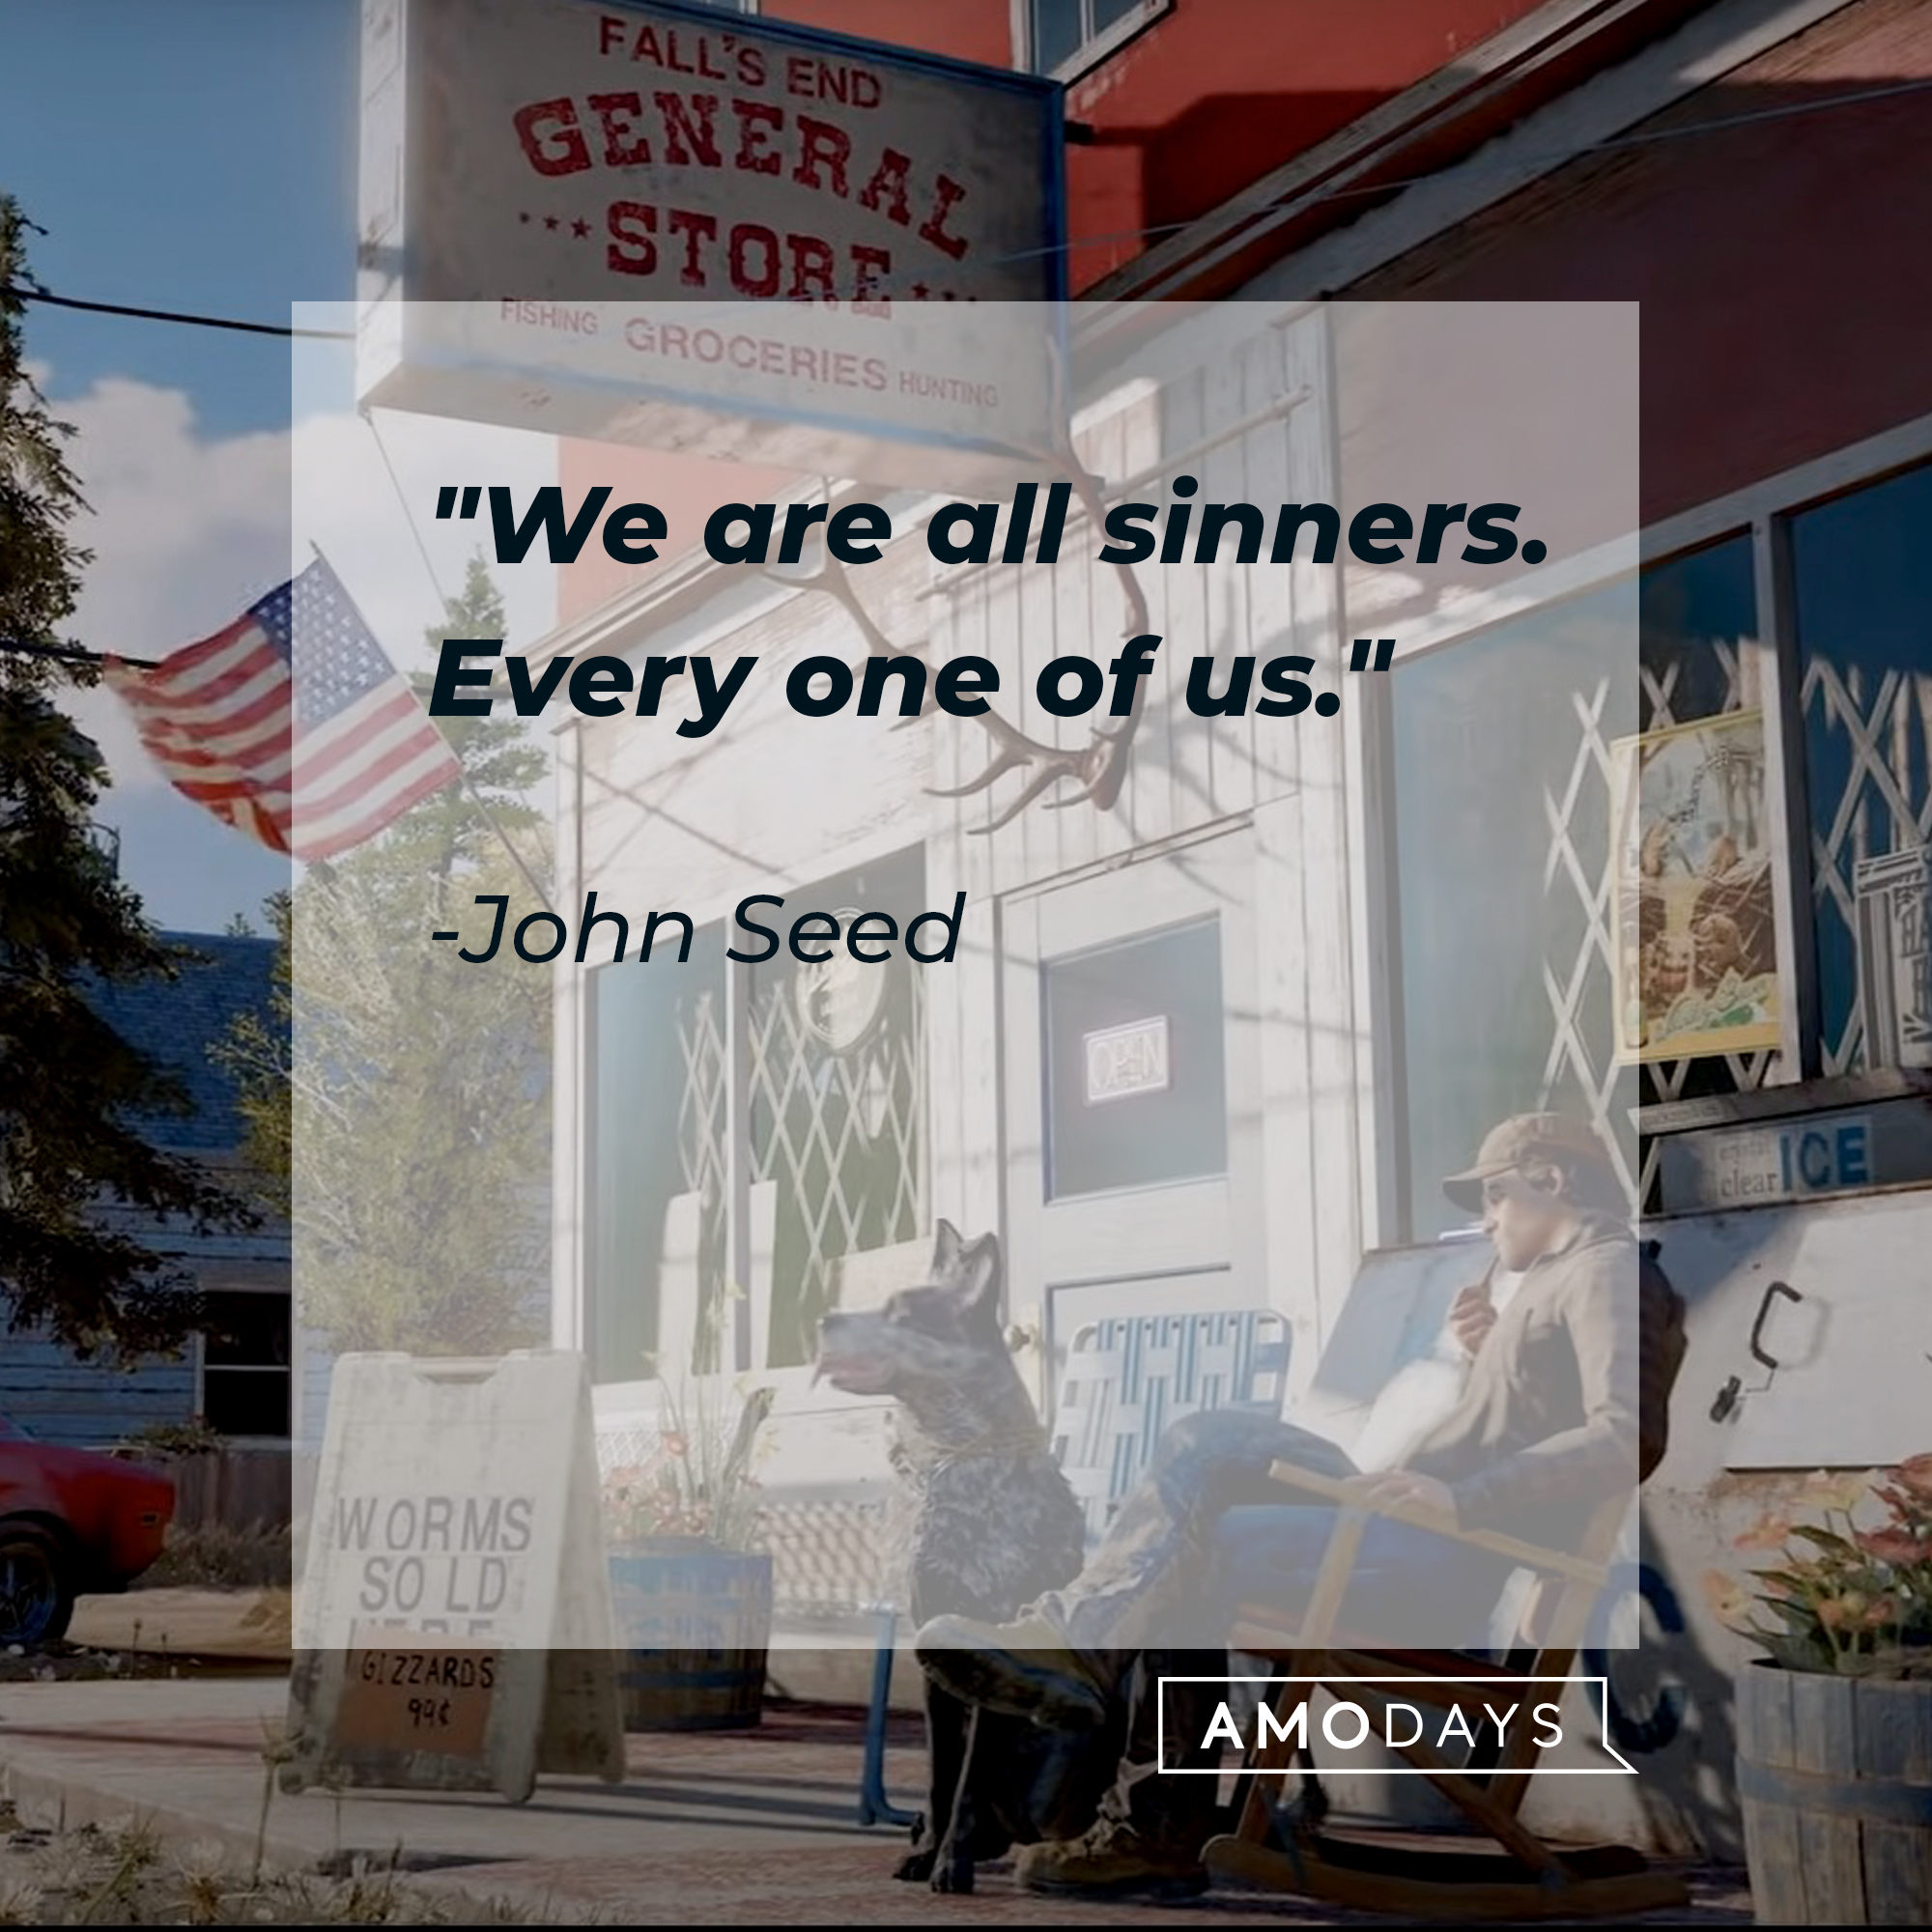 An image of "Far Cry 5" with John Seed's quote: "We are all sinners. Every one of us." | Source: youtube.com/Ubisoft North America